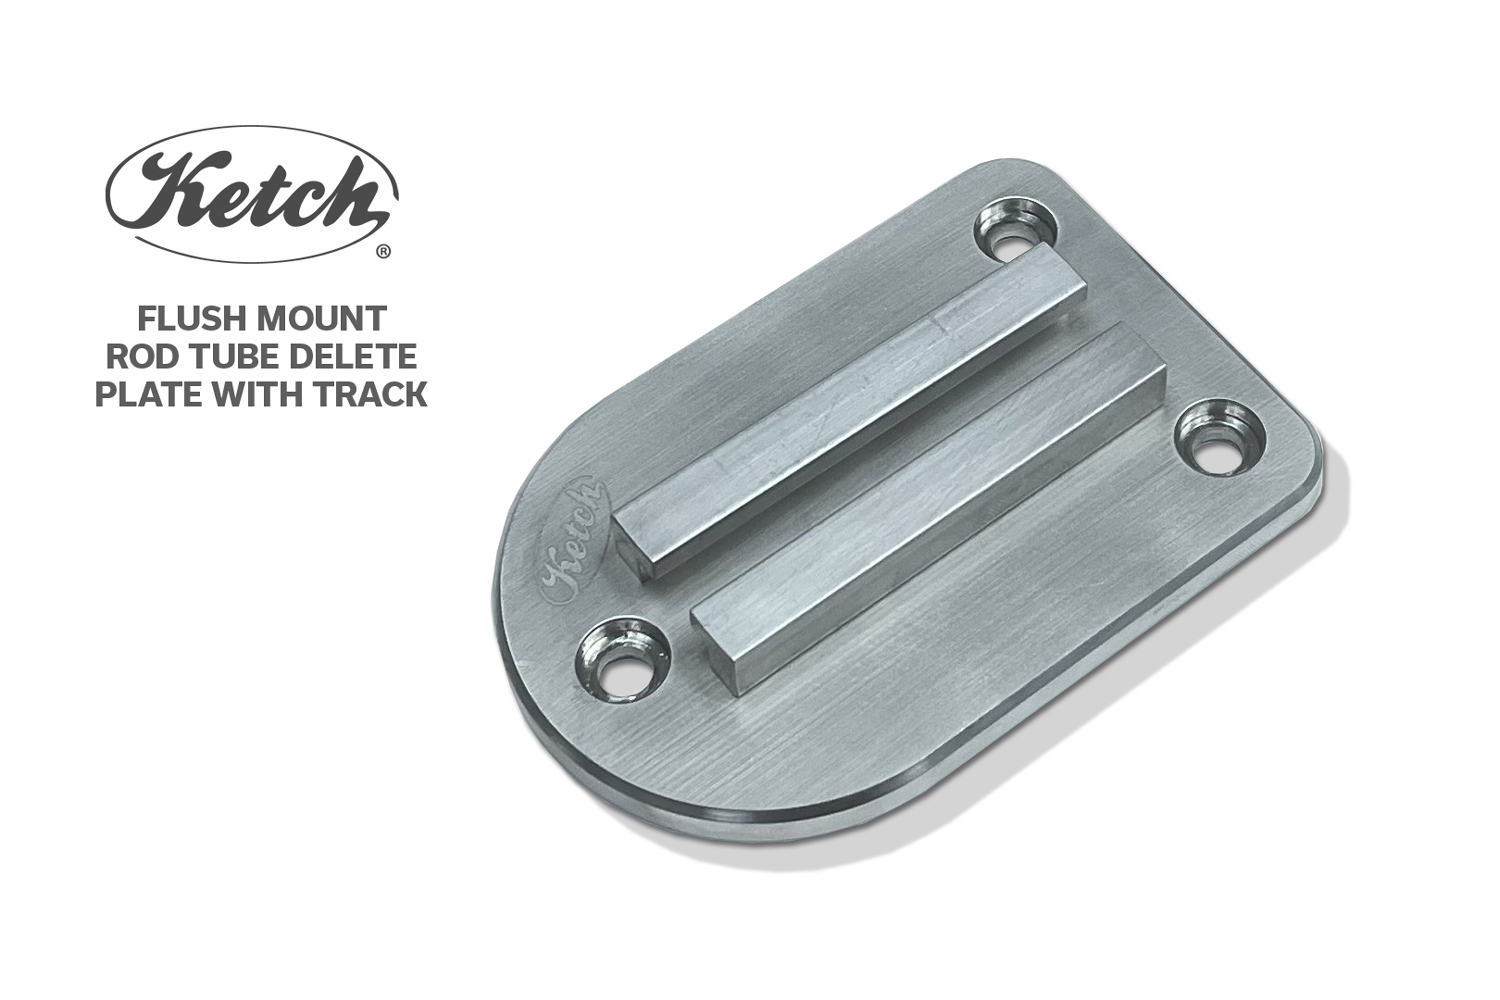 Flush Mount Rod Tube Delete Plate – Track – Ketch Products